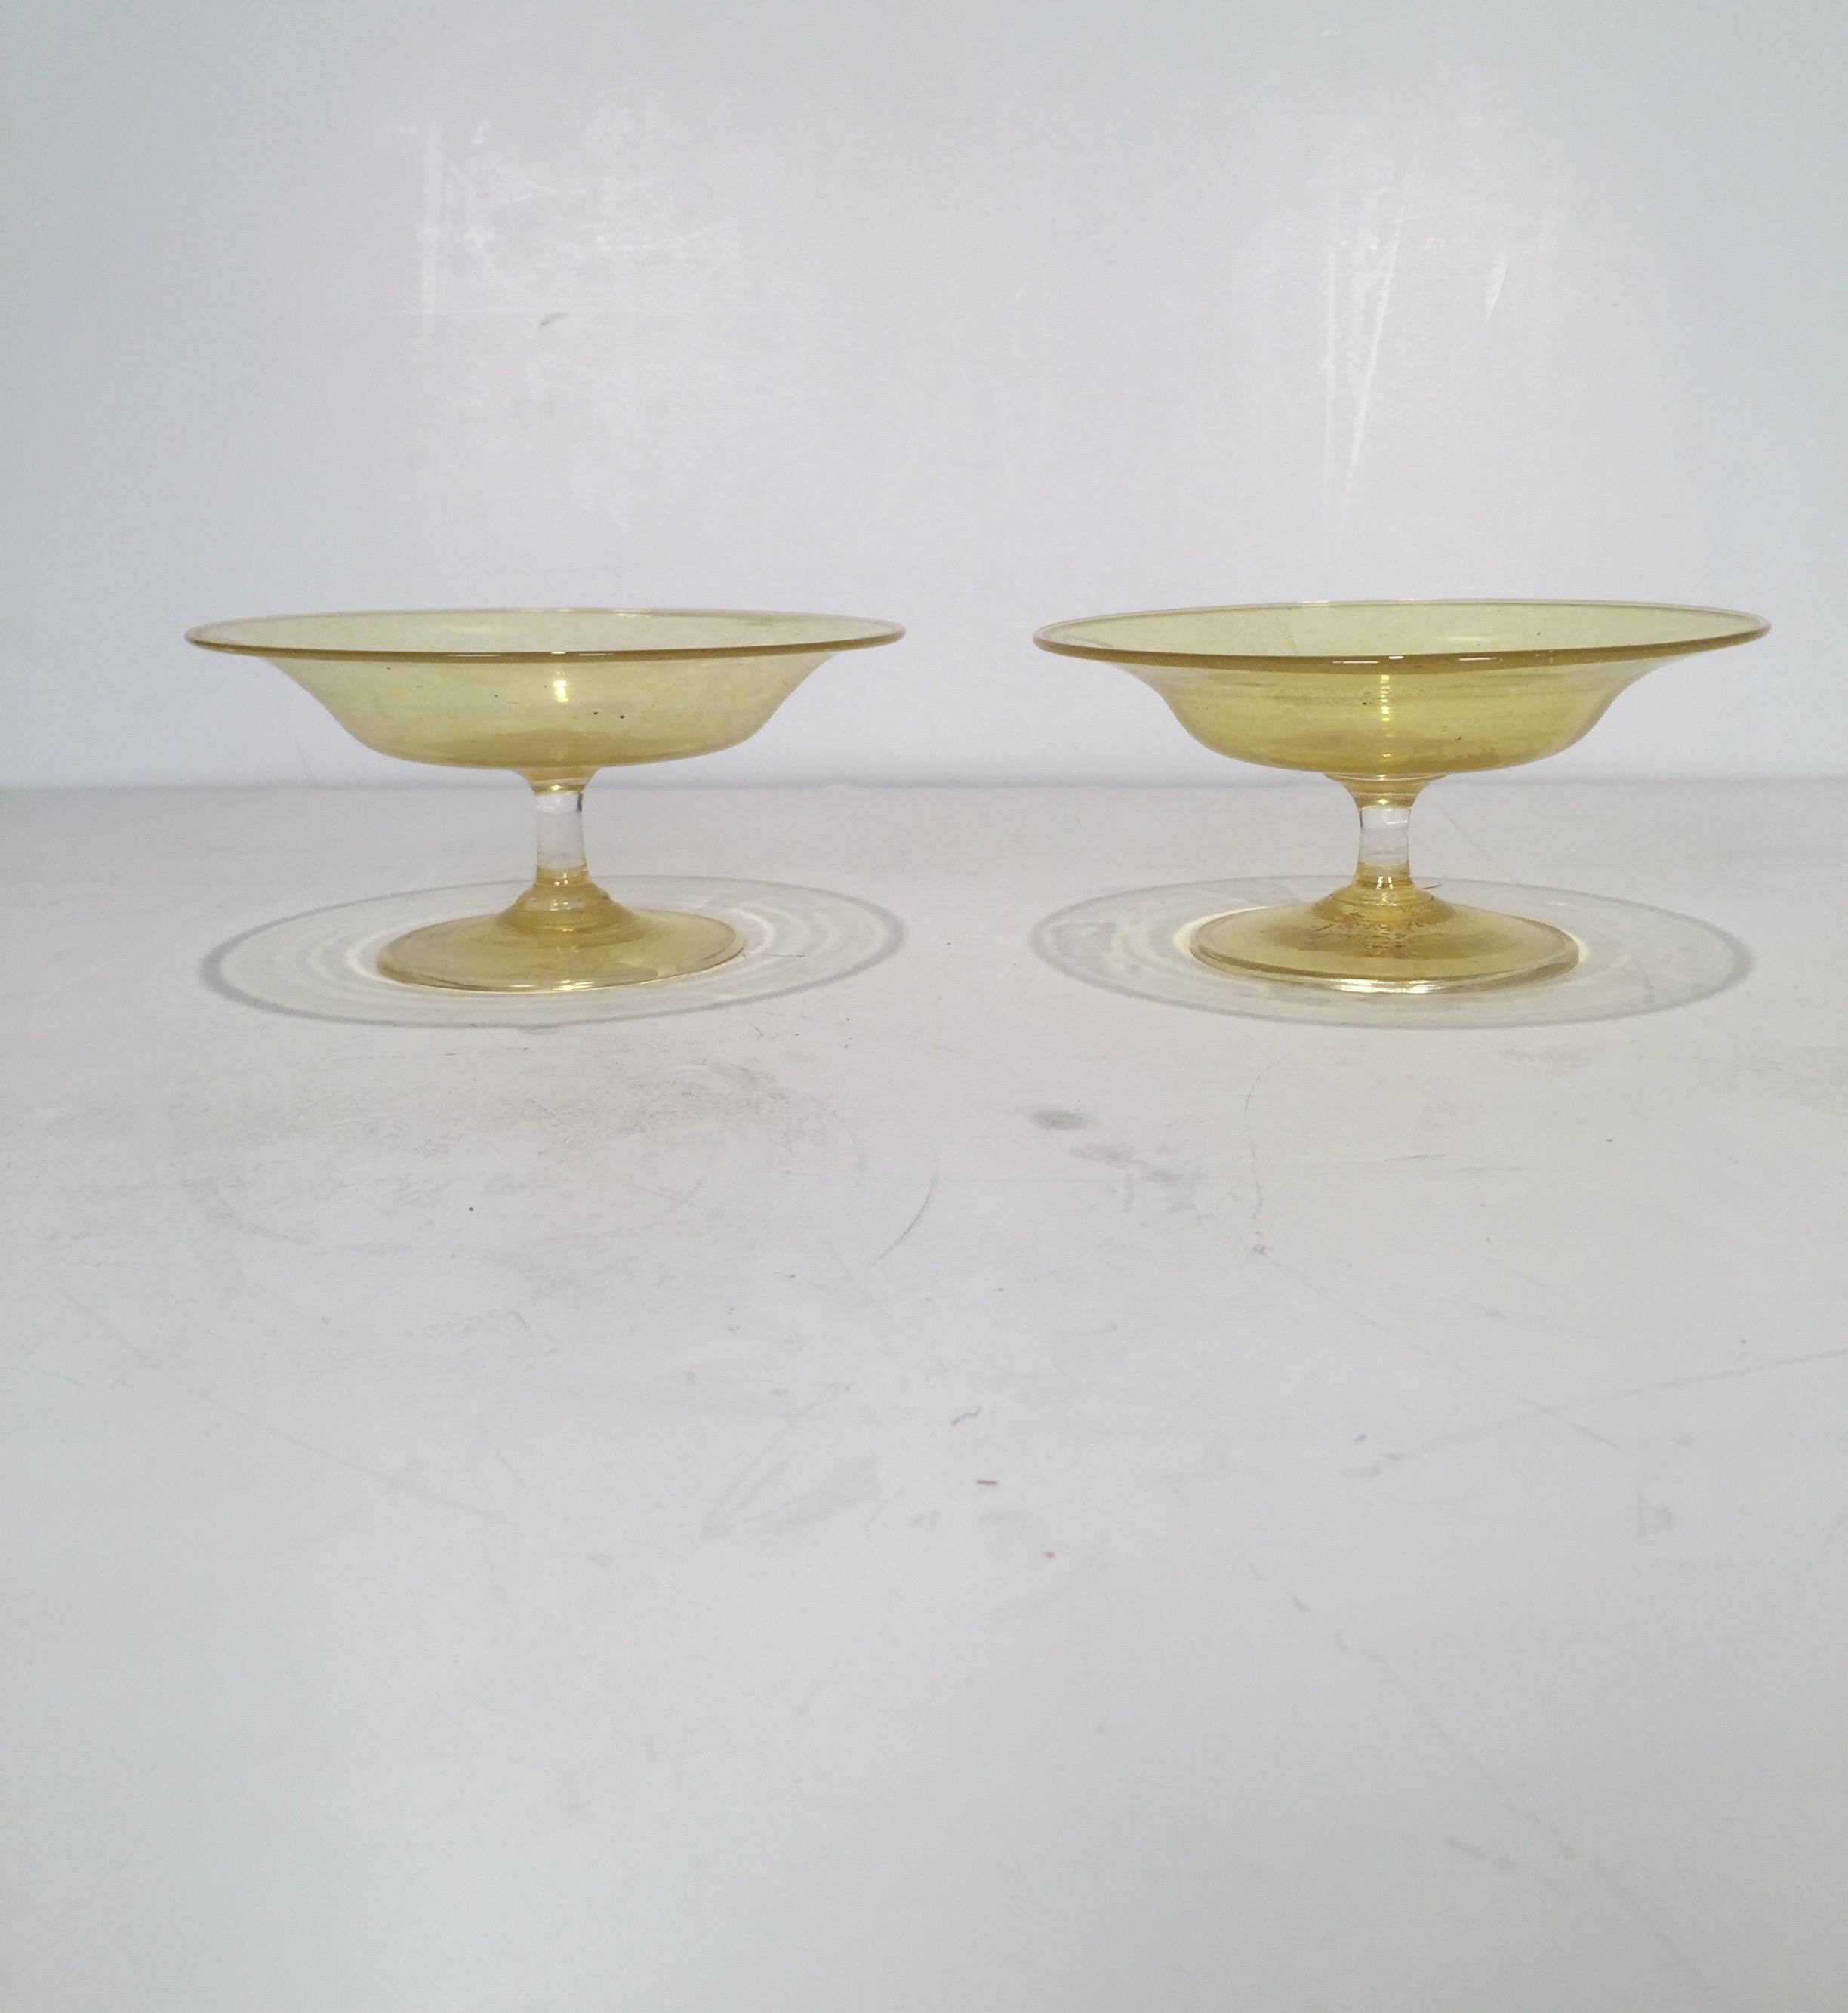 A pair of yellow amber with gold flecks hand blown Venetian glass compotes. Simplistic form with yellow base glass with gold flecks throughout, Italy, 1950s. Measures: 7 inches in diameter.